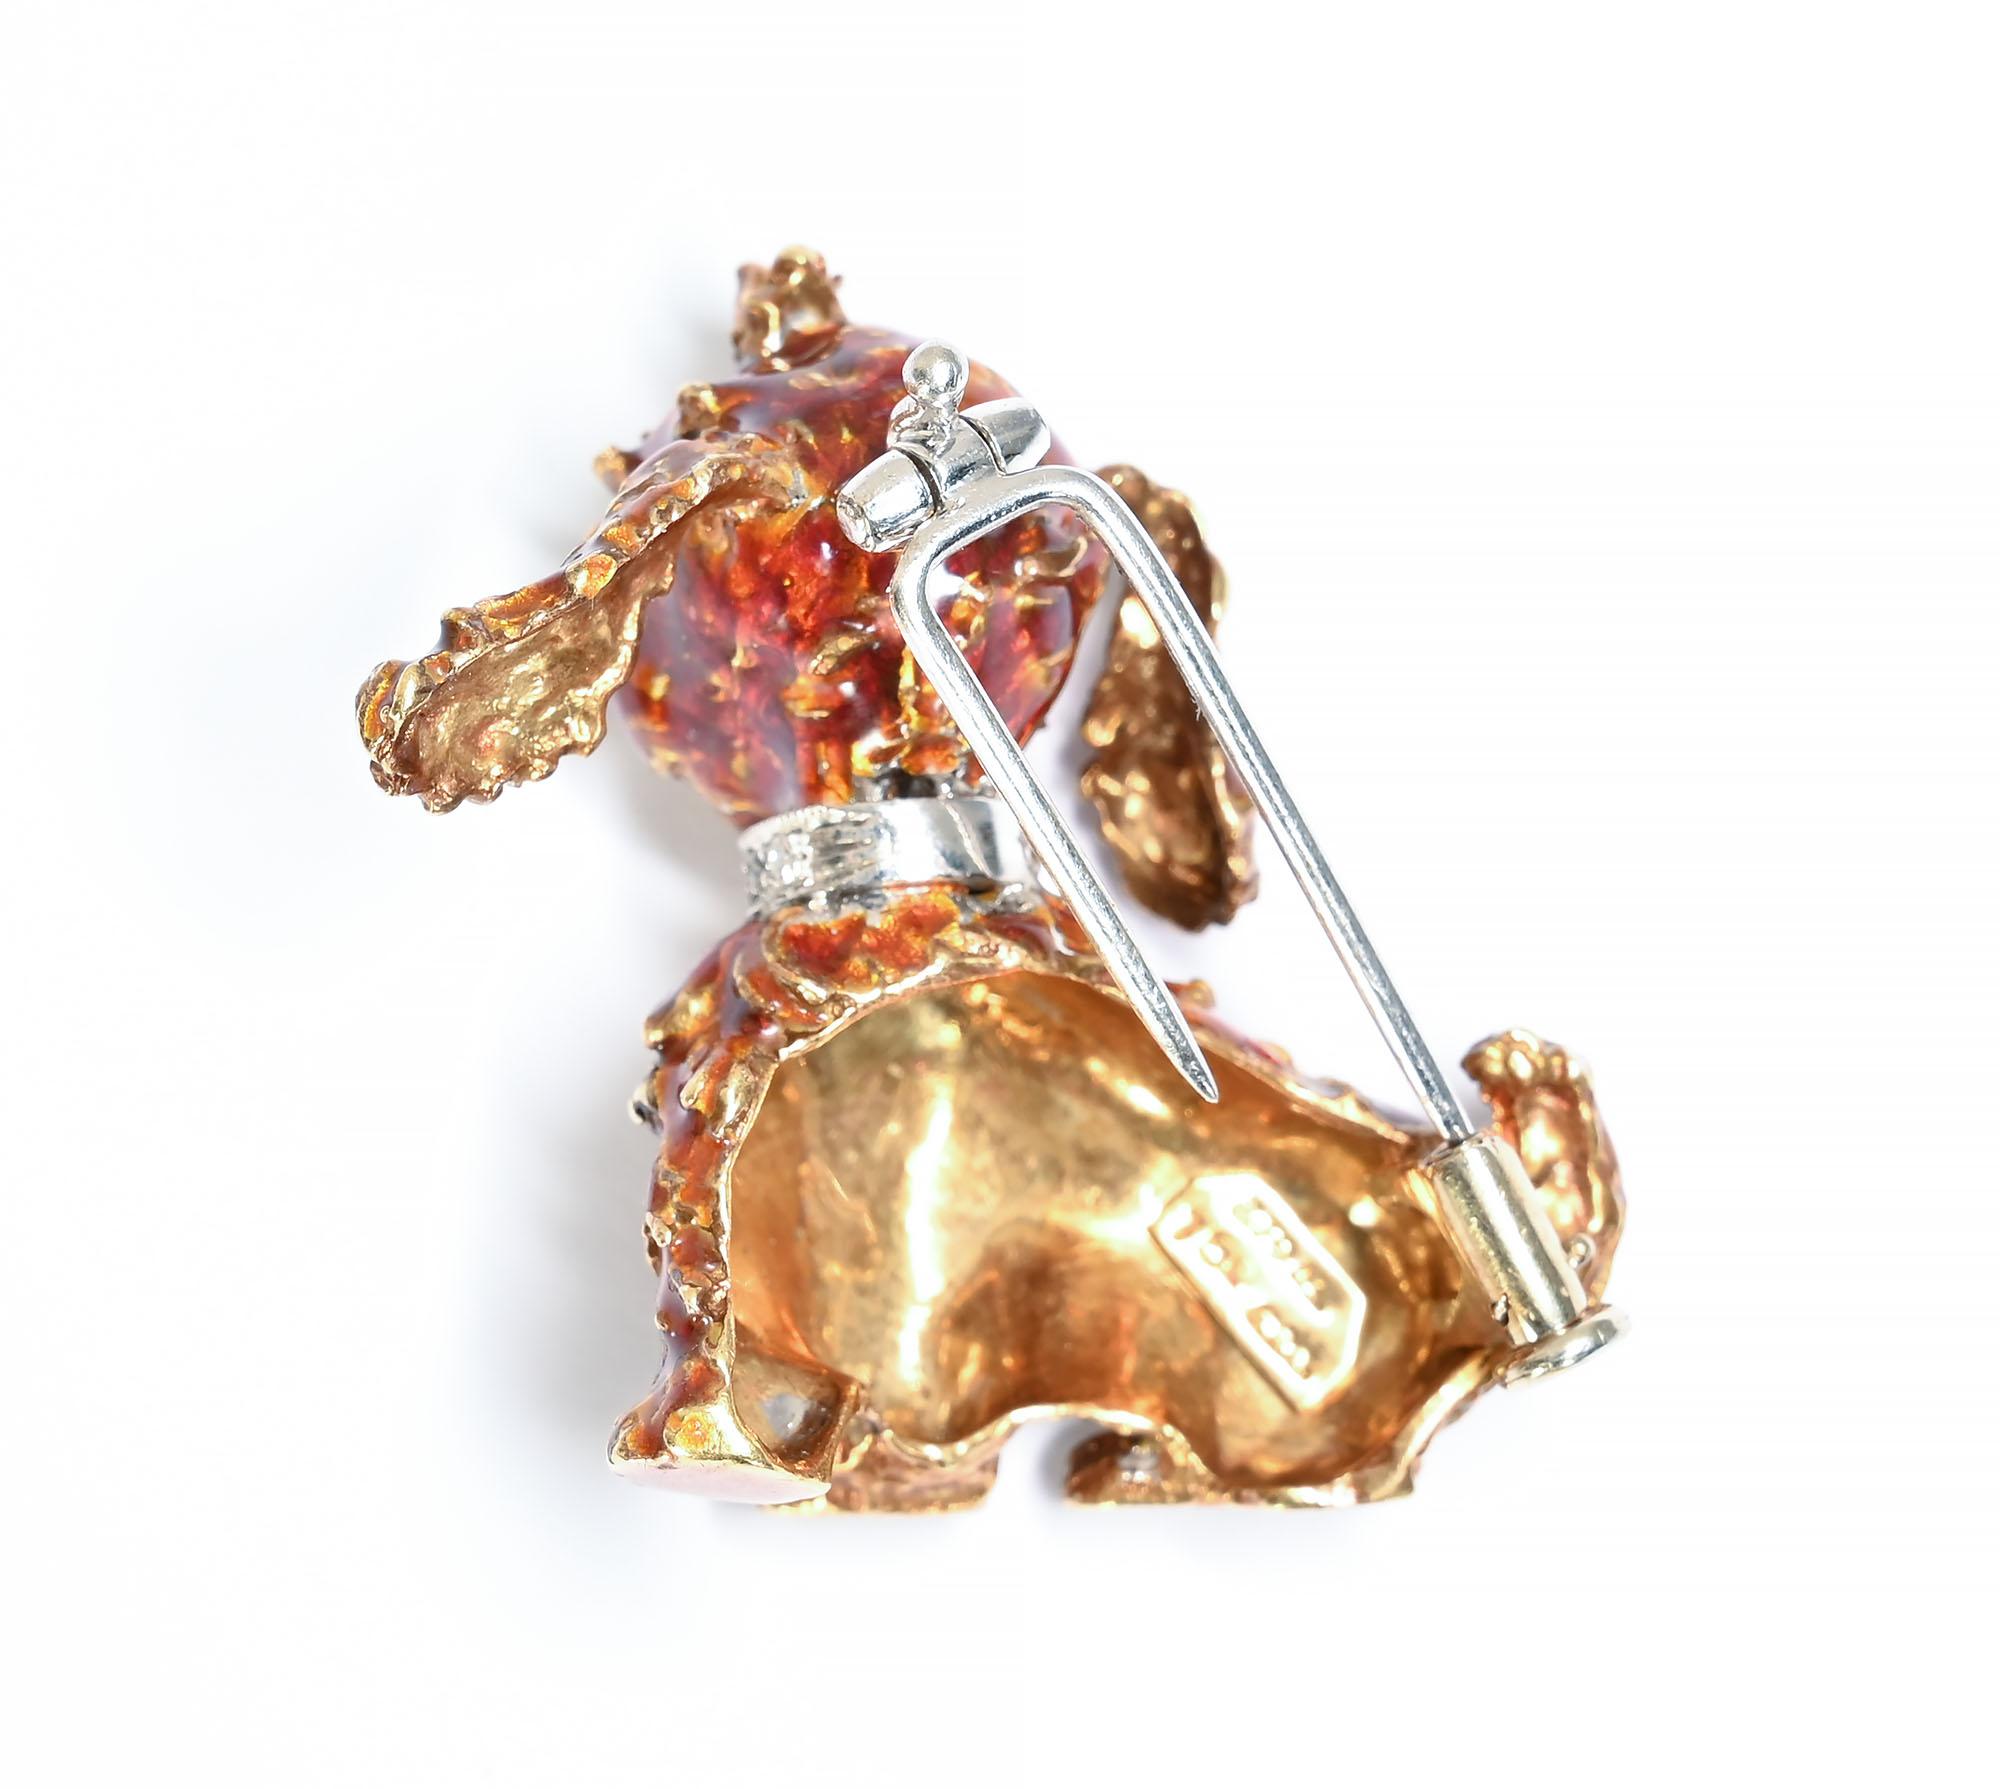 Contemporary Frascarolo Gold and Enamel Dog Brooch For Sale